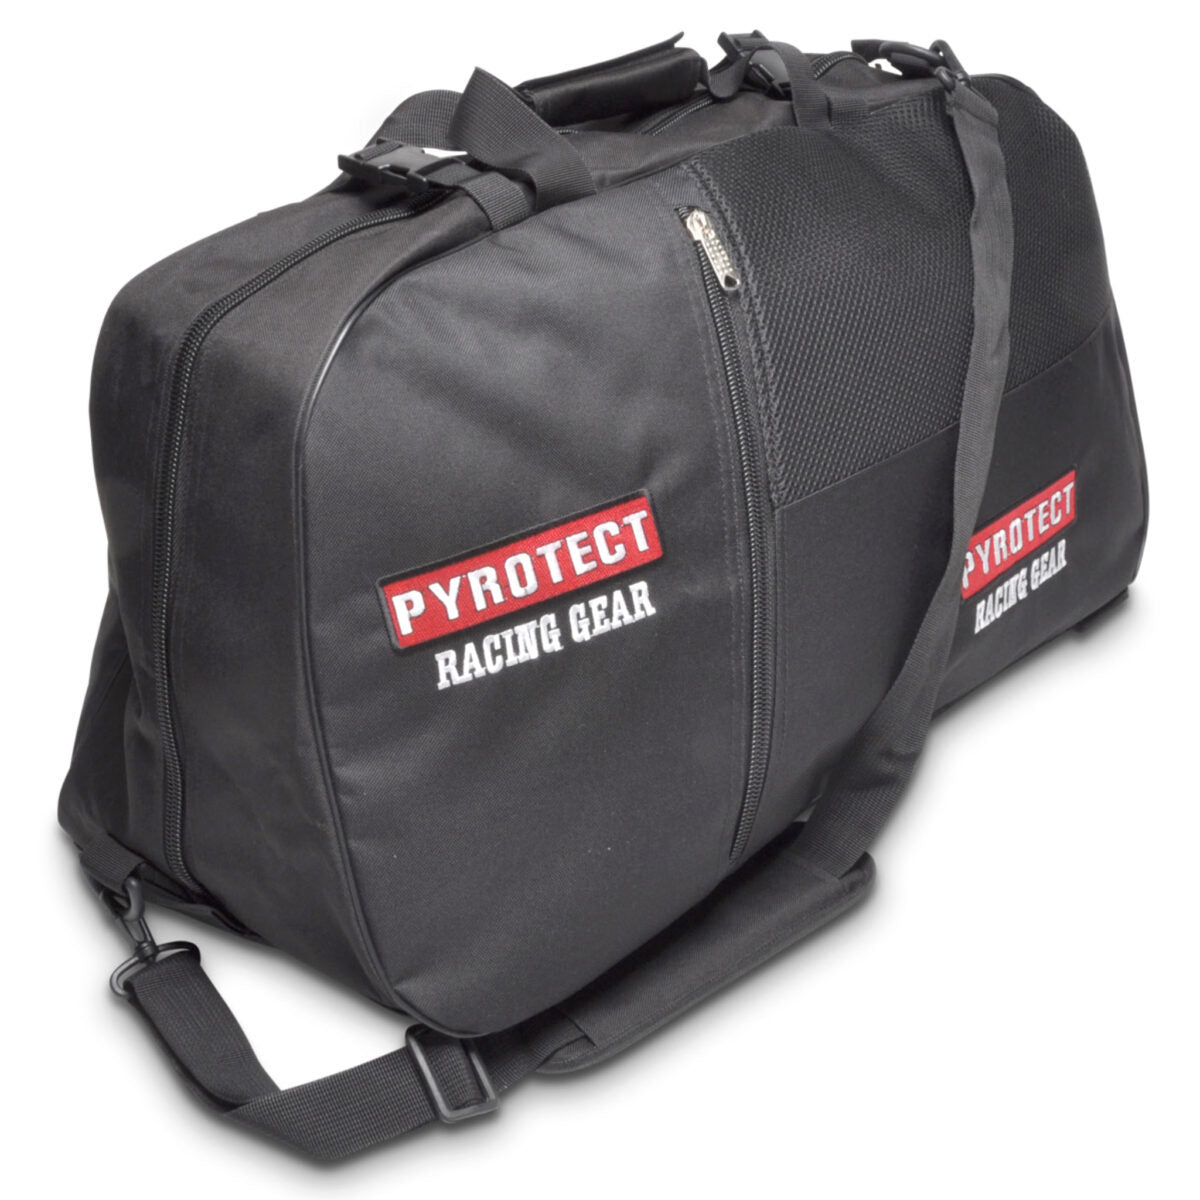 Pyrotect Gear Bag Black 3 Compartment Apparel Gear Bags main image